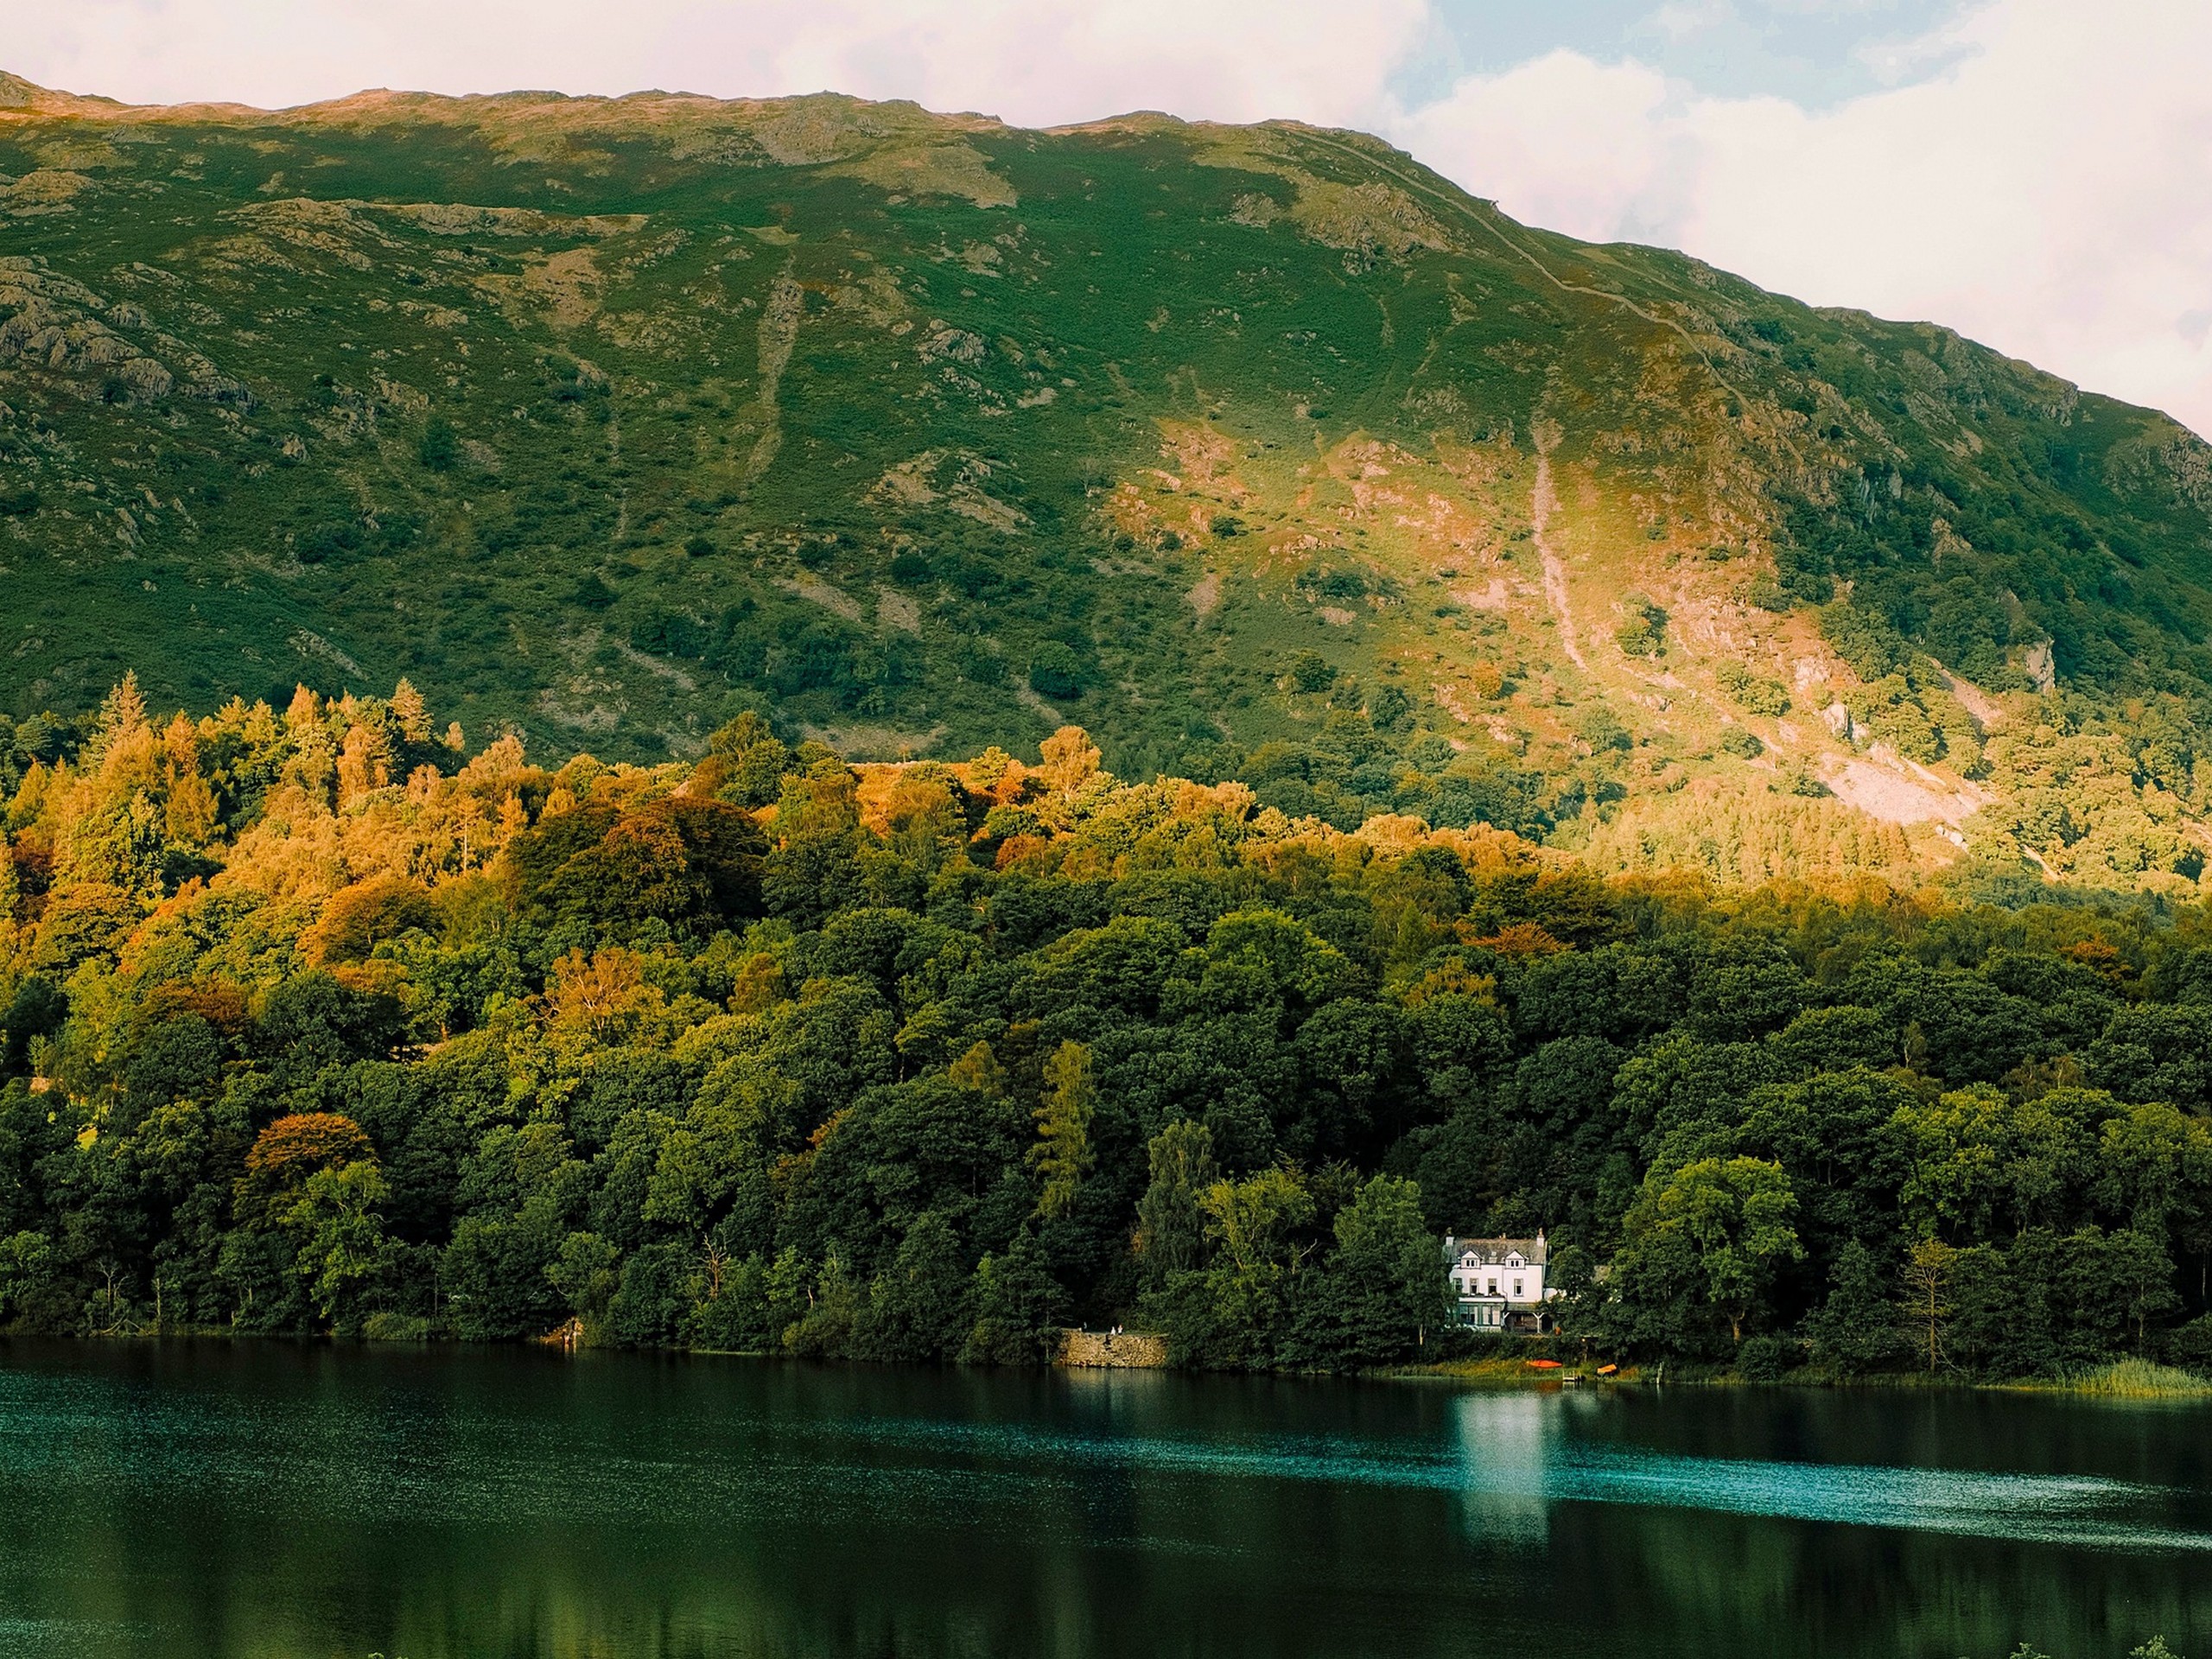 Grasmere in Lake District, visited while on self-guided coast-to-coast trail